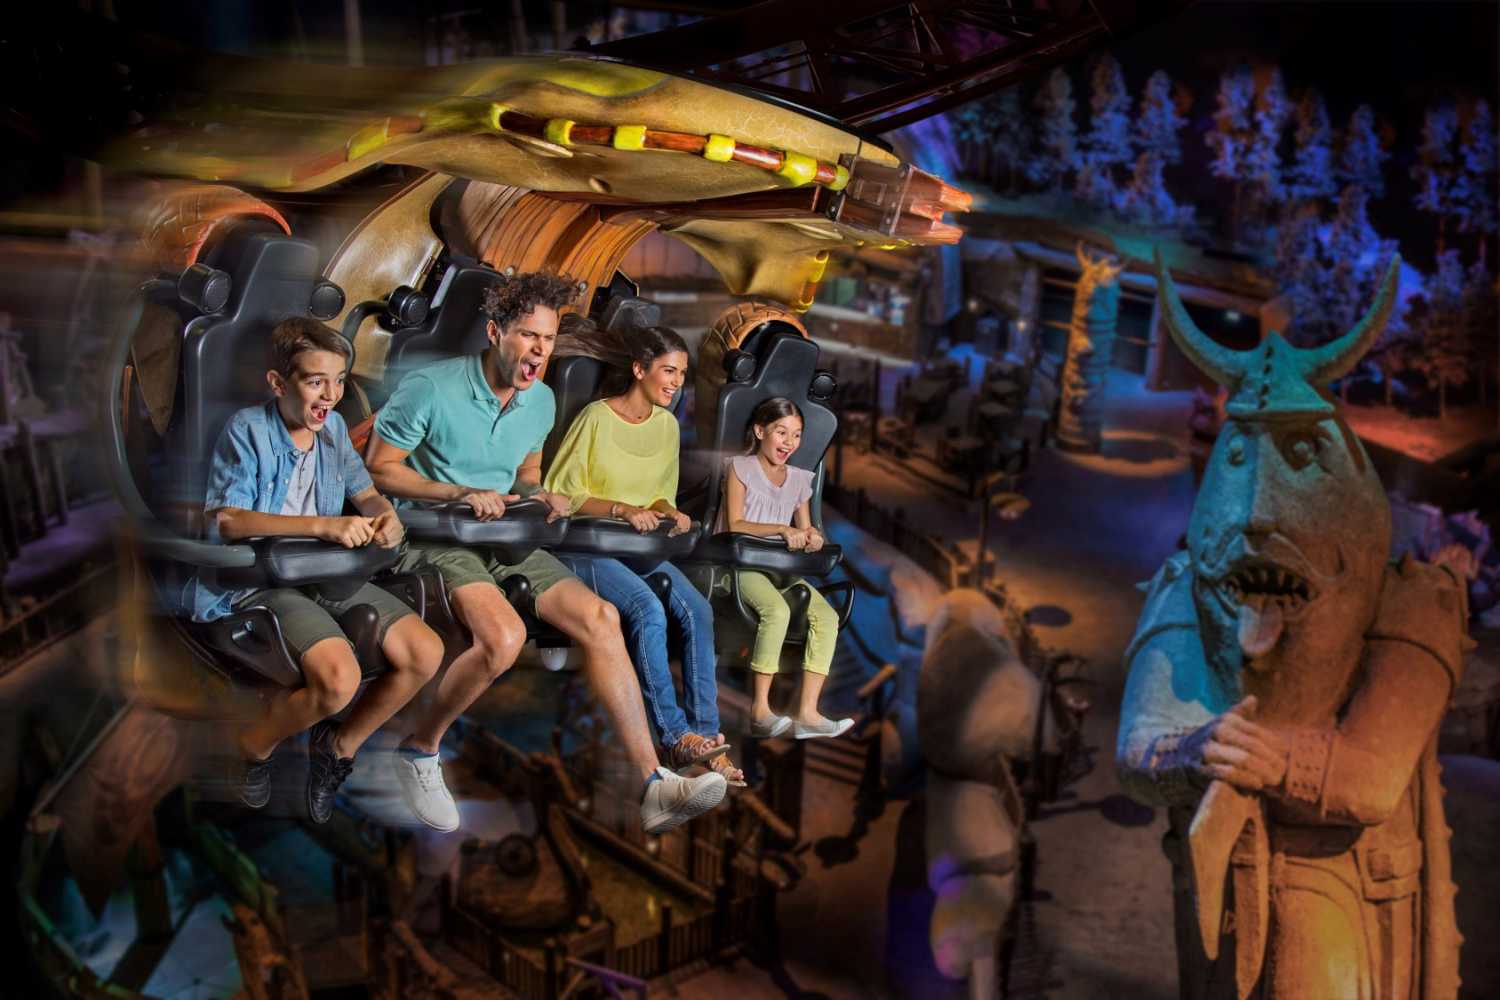 7thSense Media Servers drive a total of 16 rides and attractions across two parks